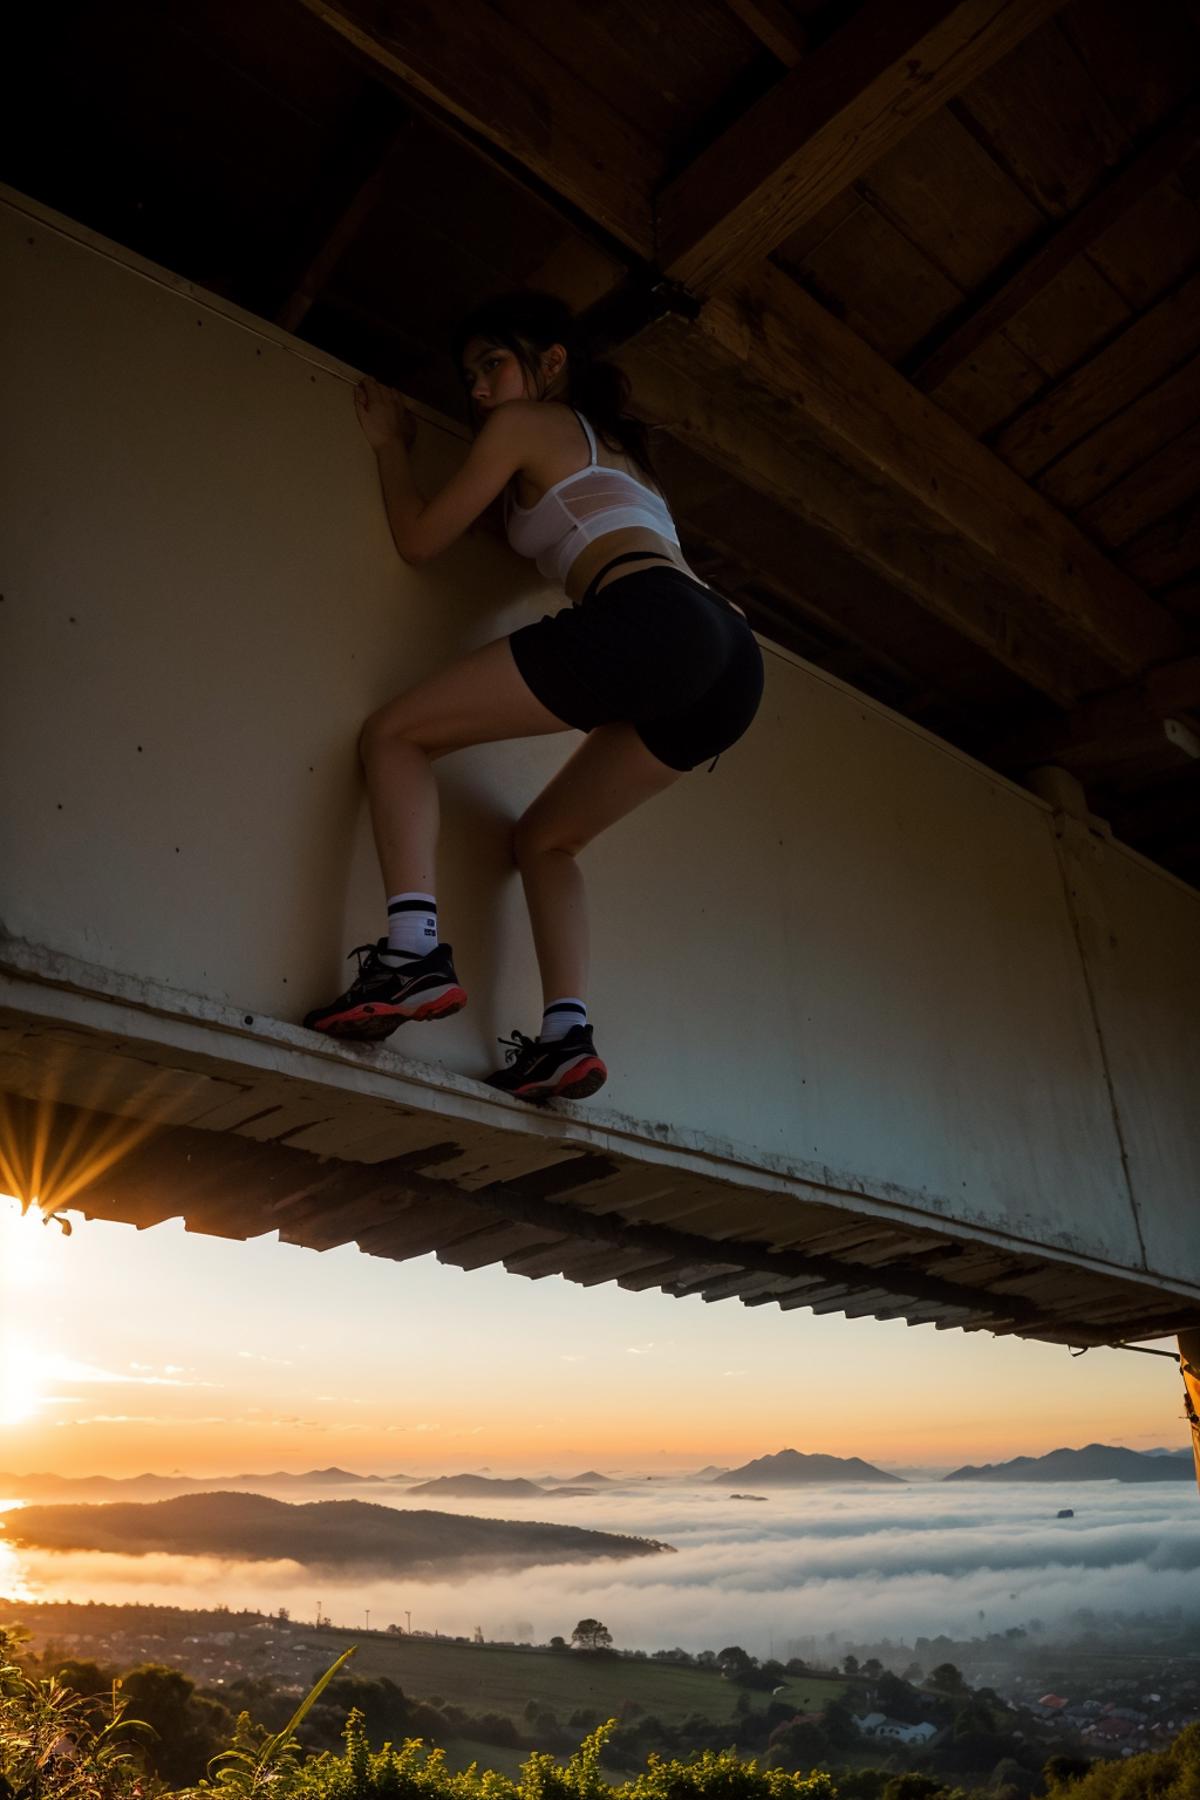 Woman Climbing Wall at Sunset - Outdoor Adventure with Mountains in Background